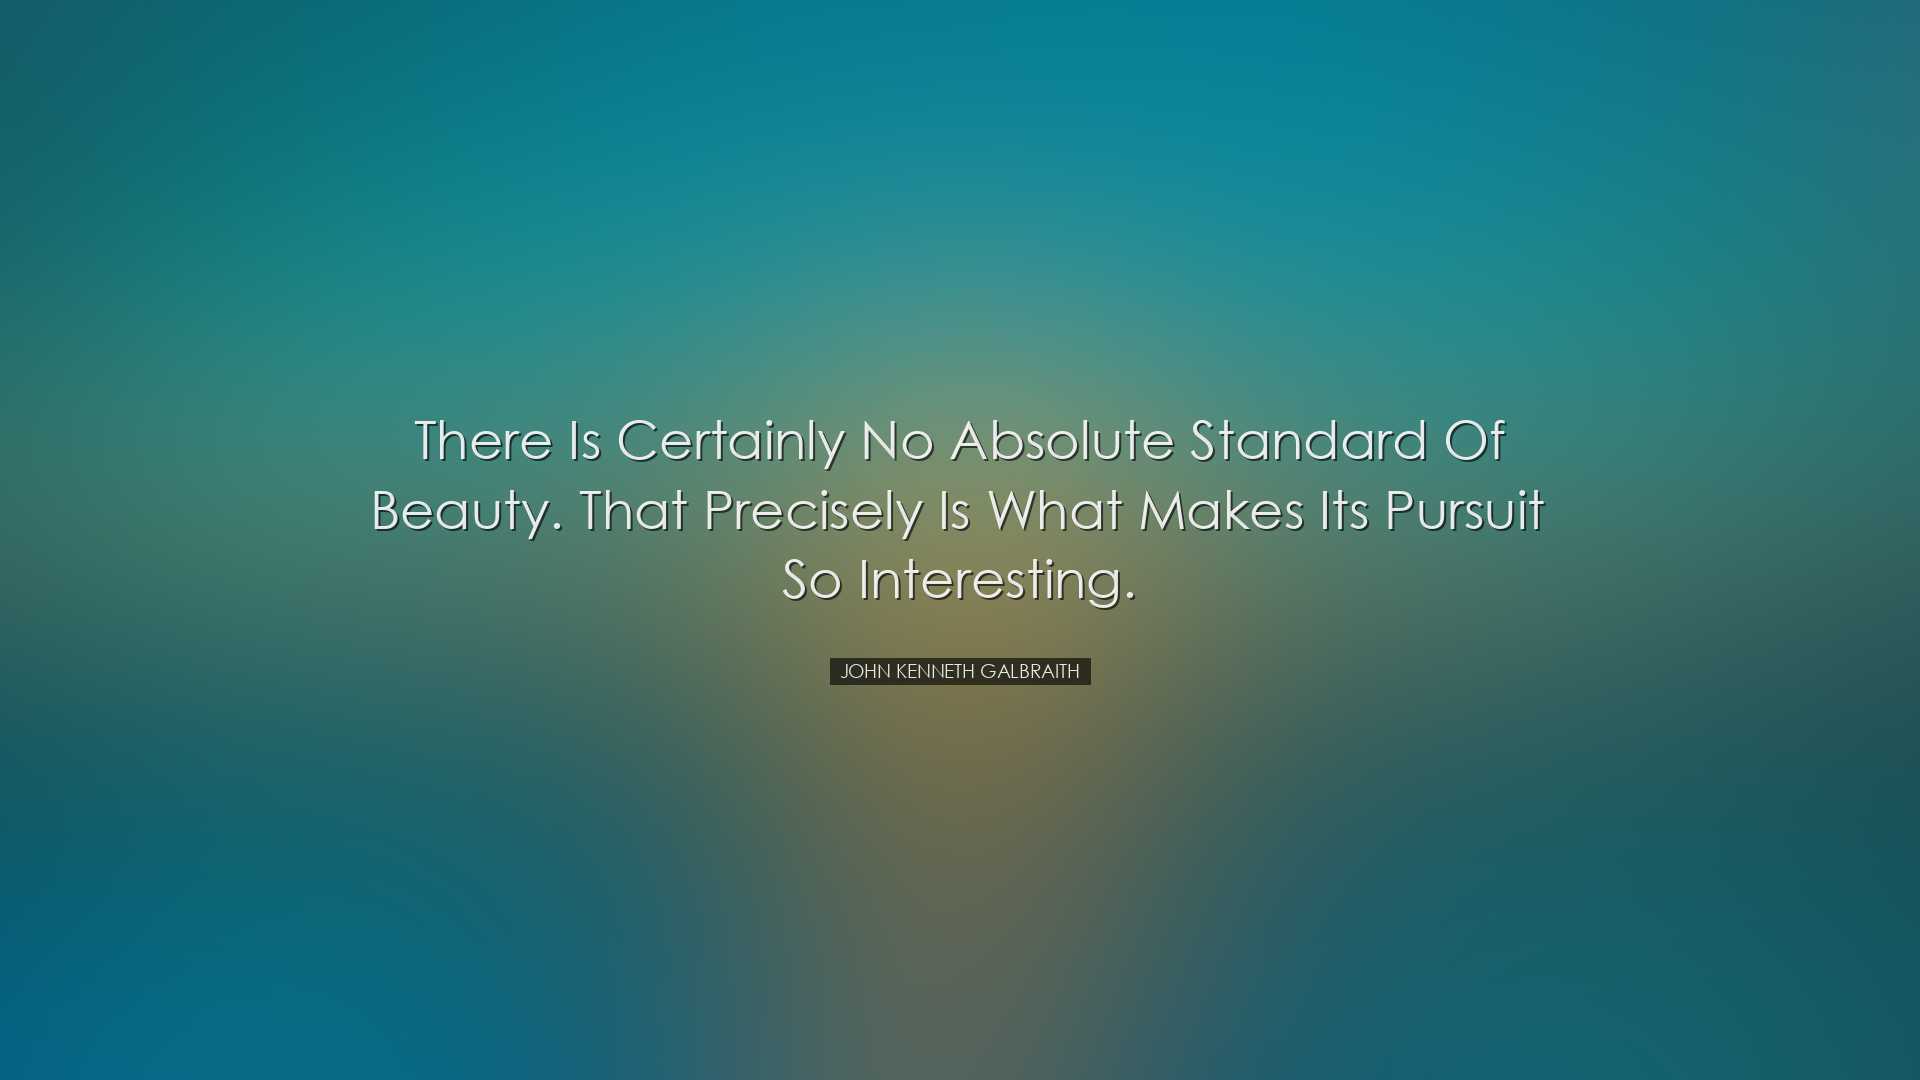 There is certainly no absolute standard of beauty. That precisely